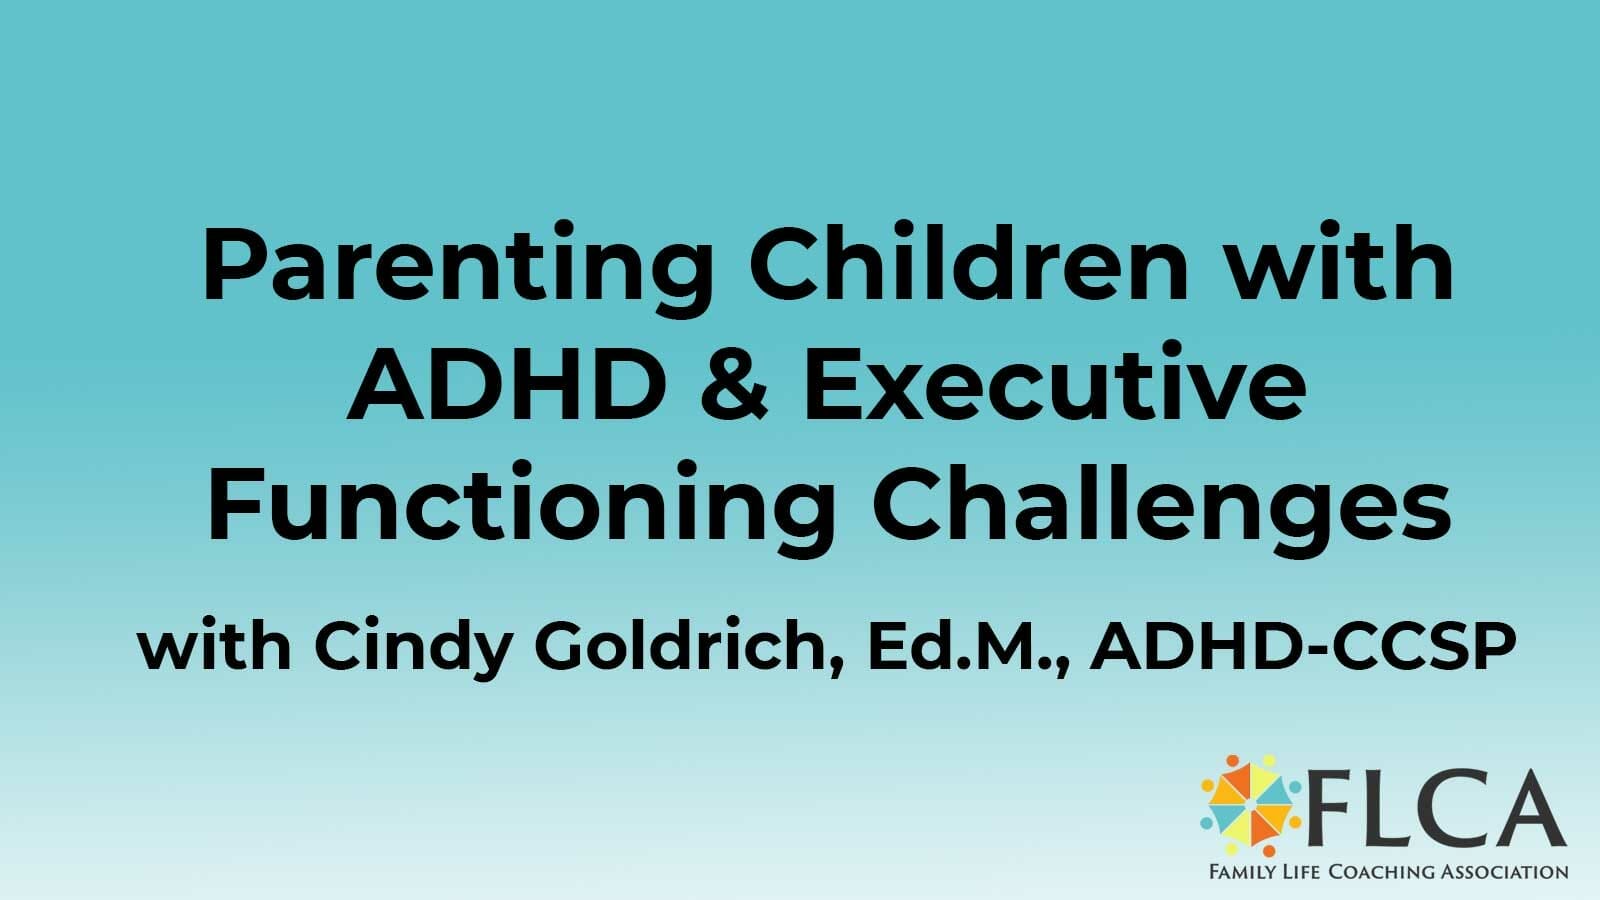 Parenting Children with ADHD & Executive Functioning Challenges